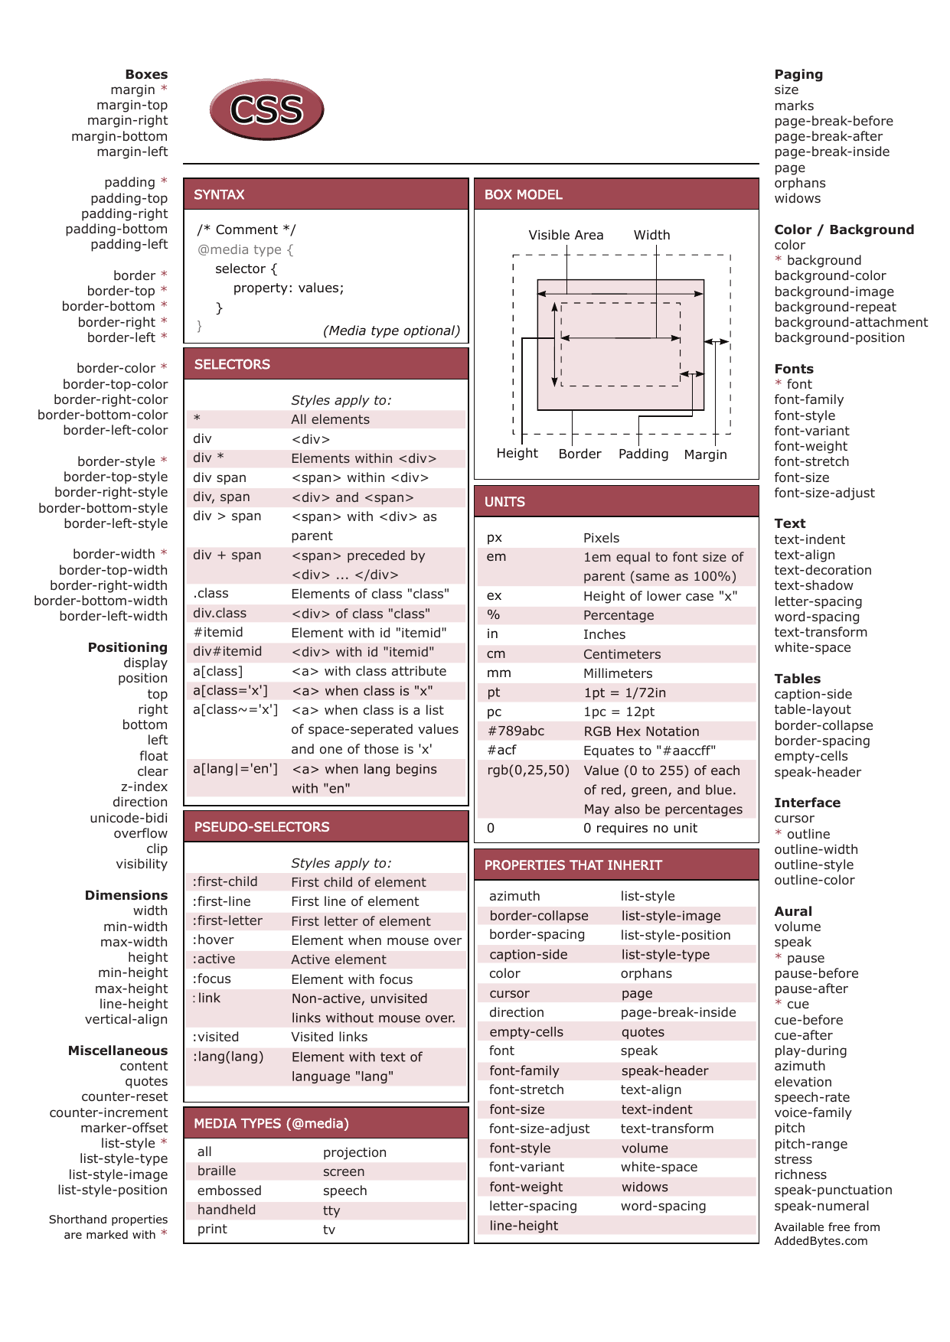 Css Cheat Sheet - A comprehensive guide of CSS properties and values